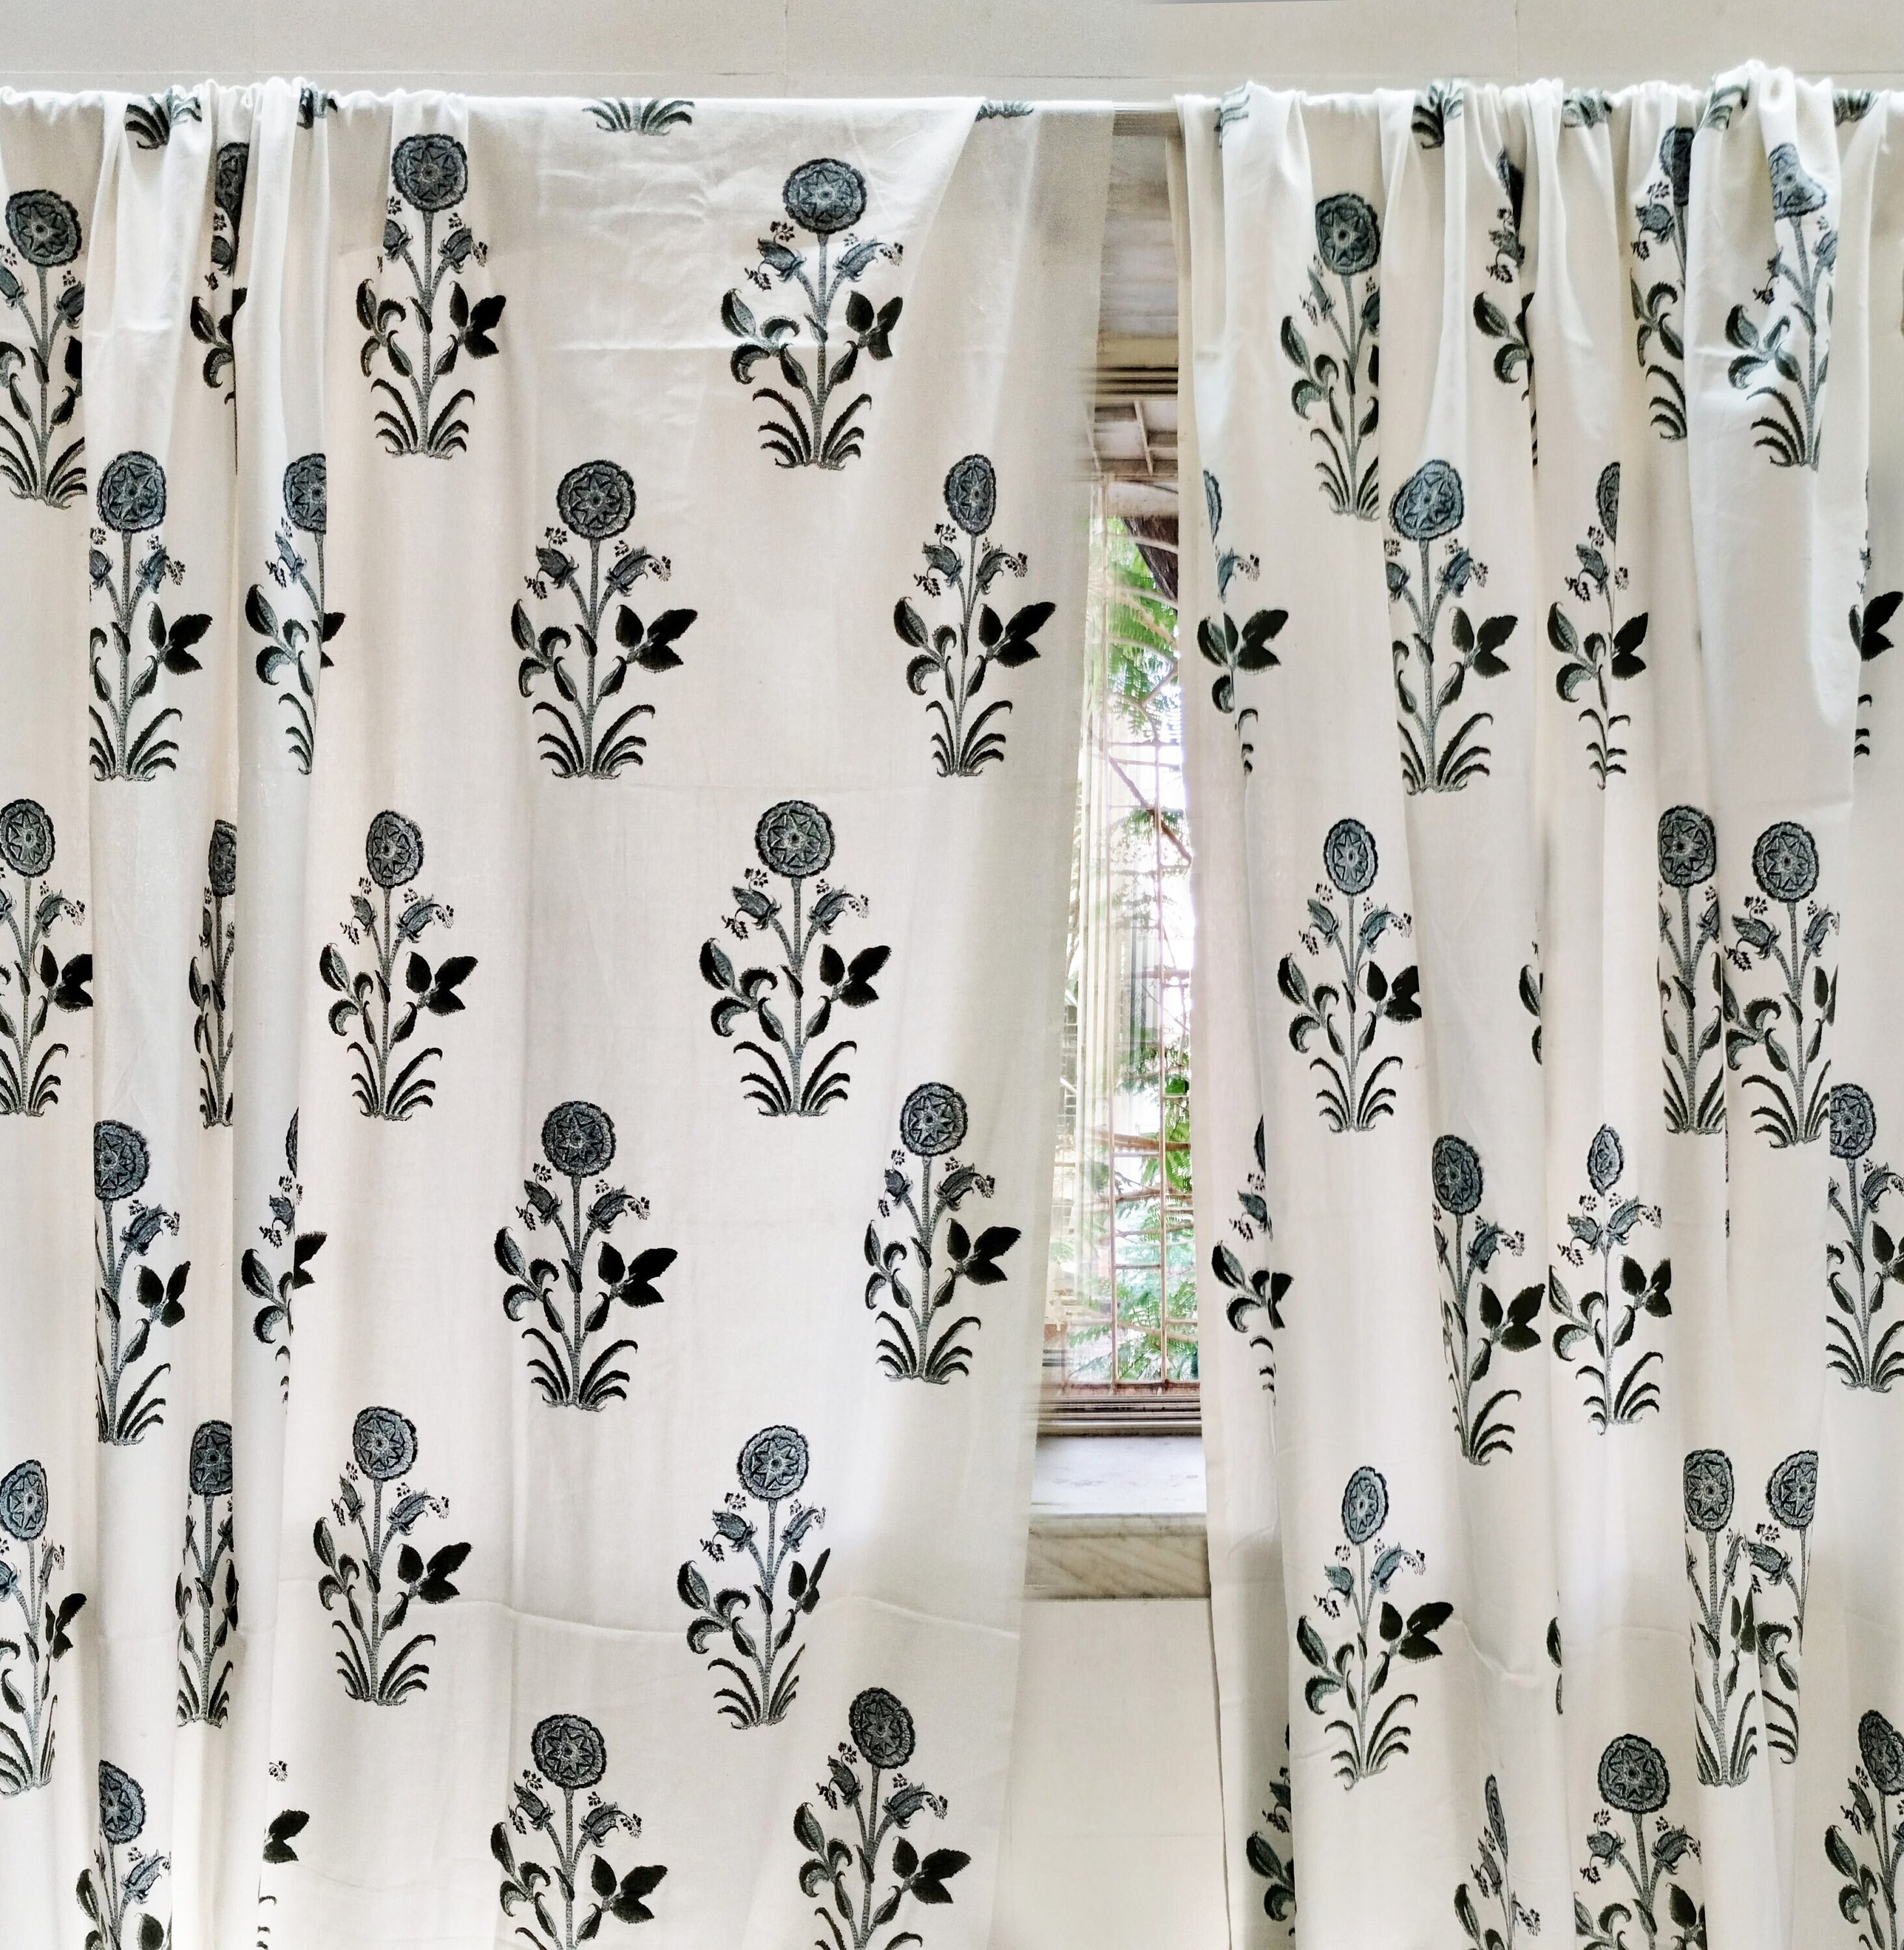  Magnetic Curtain Weights, Plastic Covered Heavy Duty No Sew  Shower Curtain Magnets, Avoid Blowing Around, Work for Drapery, Tablecloth,  Flag, Outdoor Curtain Liner (Beige, 6 Sets) : Home & Kitchen